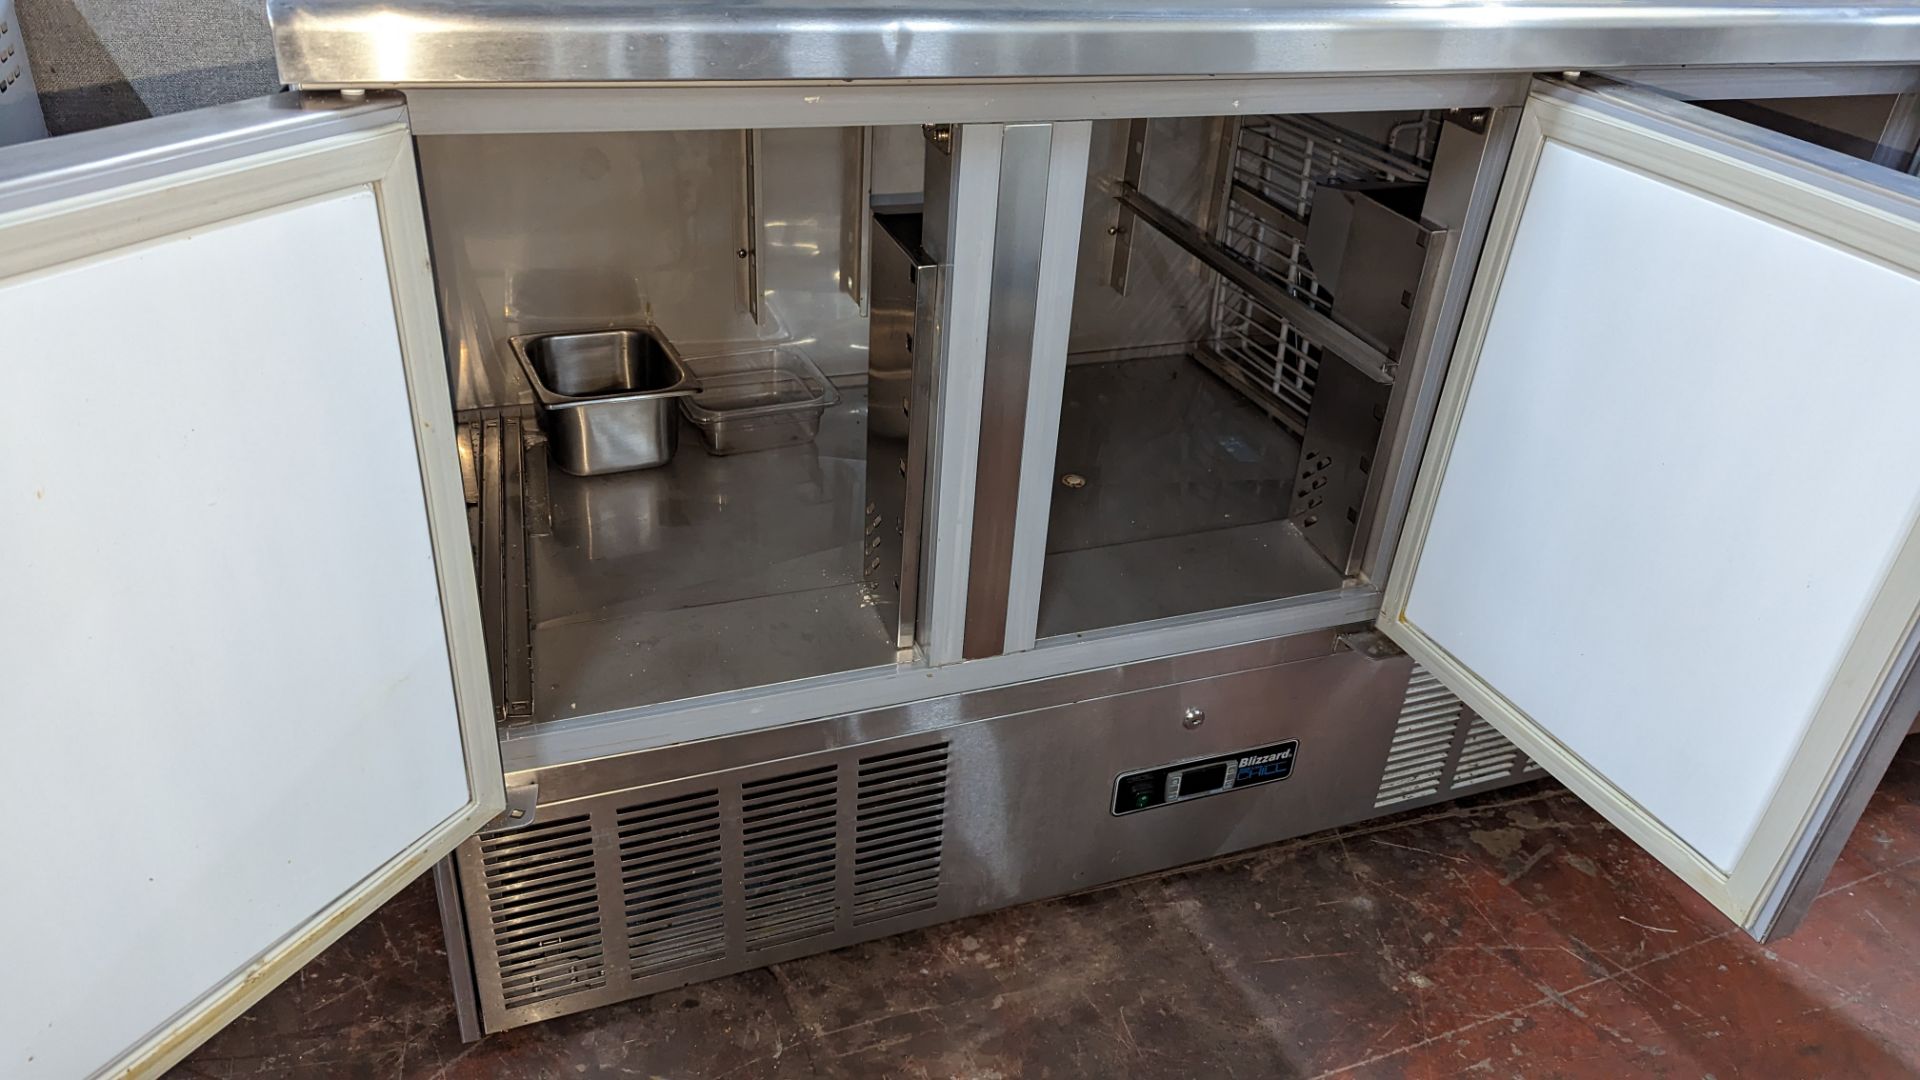 Blizzard stainless steel refrigerated 3 door prep unit with hinged access to saladette unit at rear. - Image 6 of 10